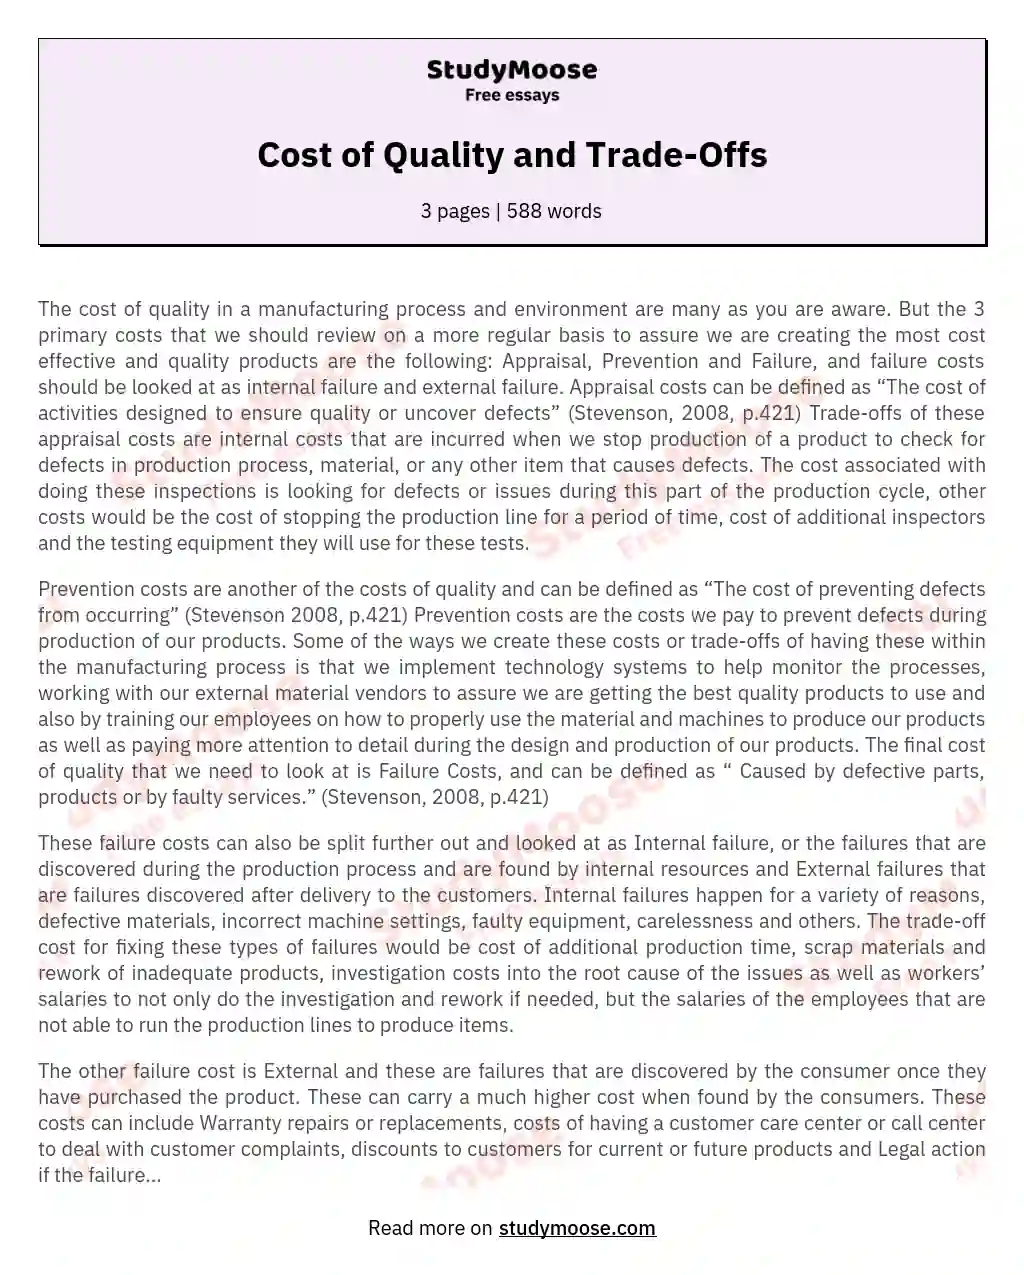 Cost of Quality and Trade-Offs essay